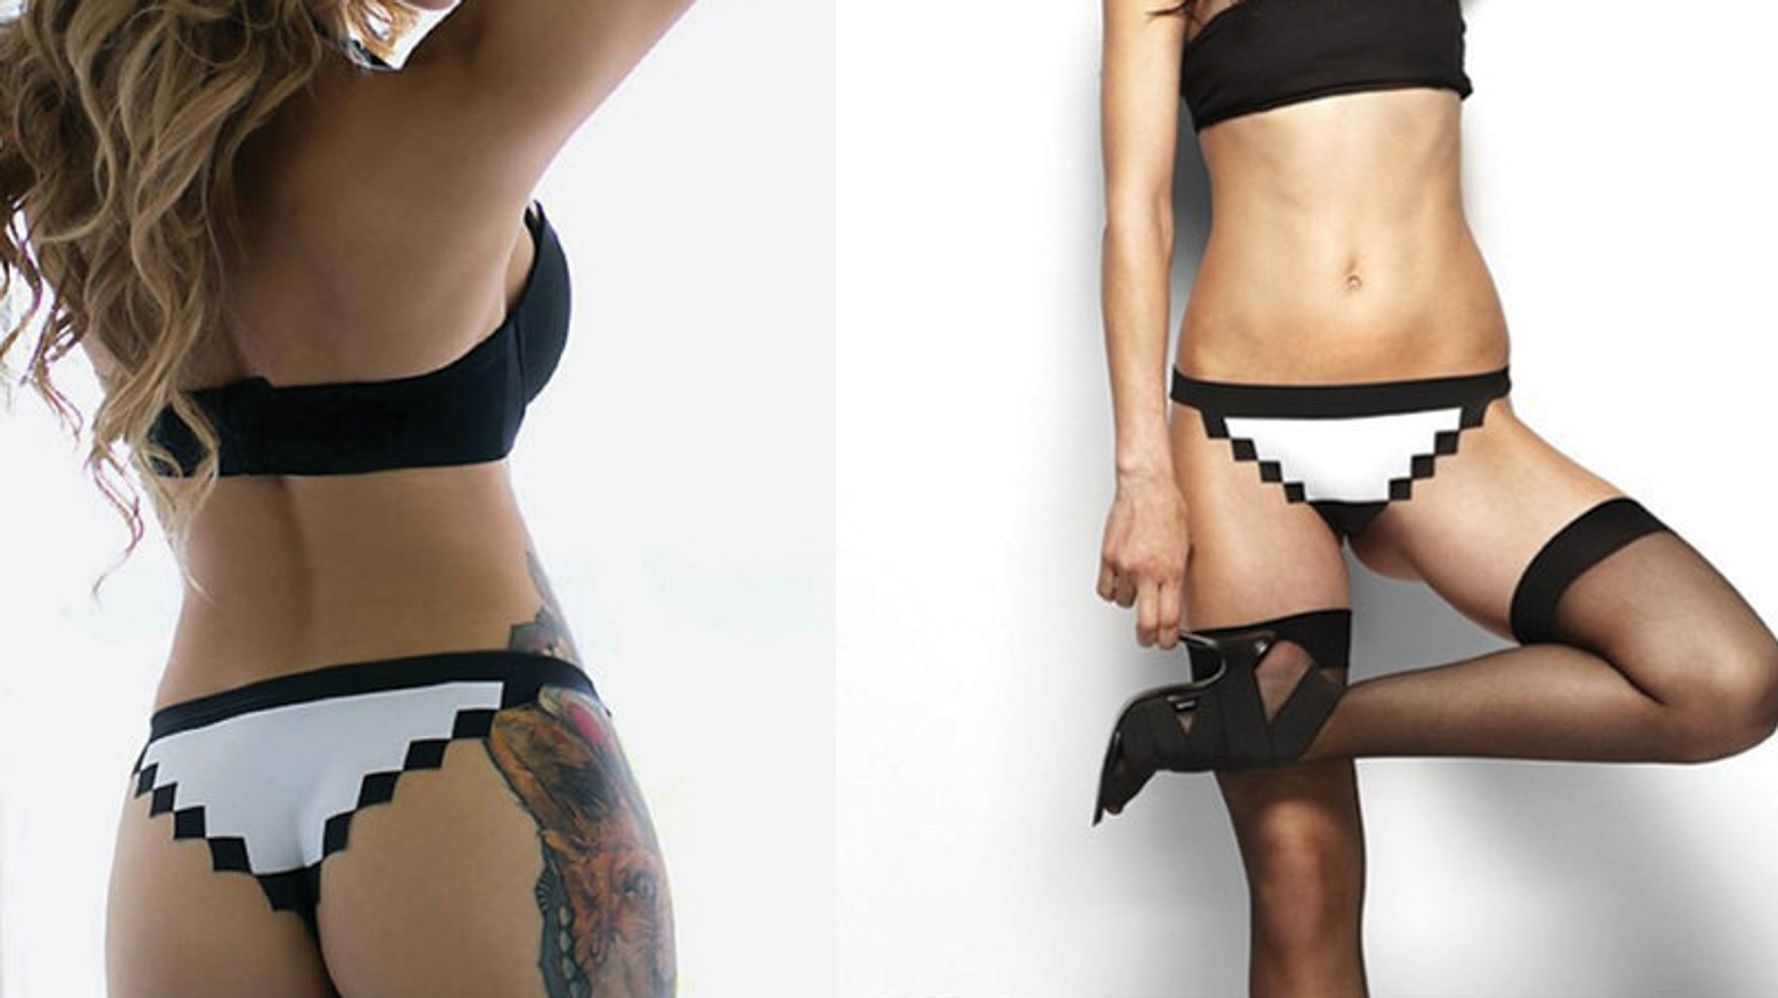 Pixelate Your Butt (And Support A Good Cause) With Computer-Inspired Panties